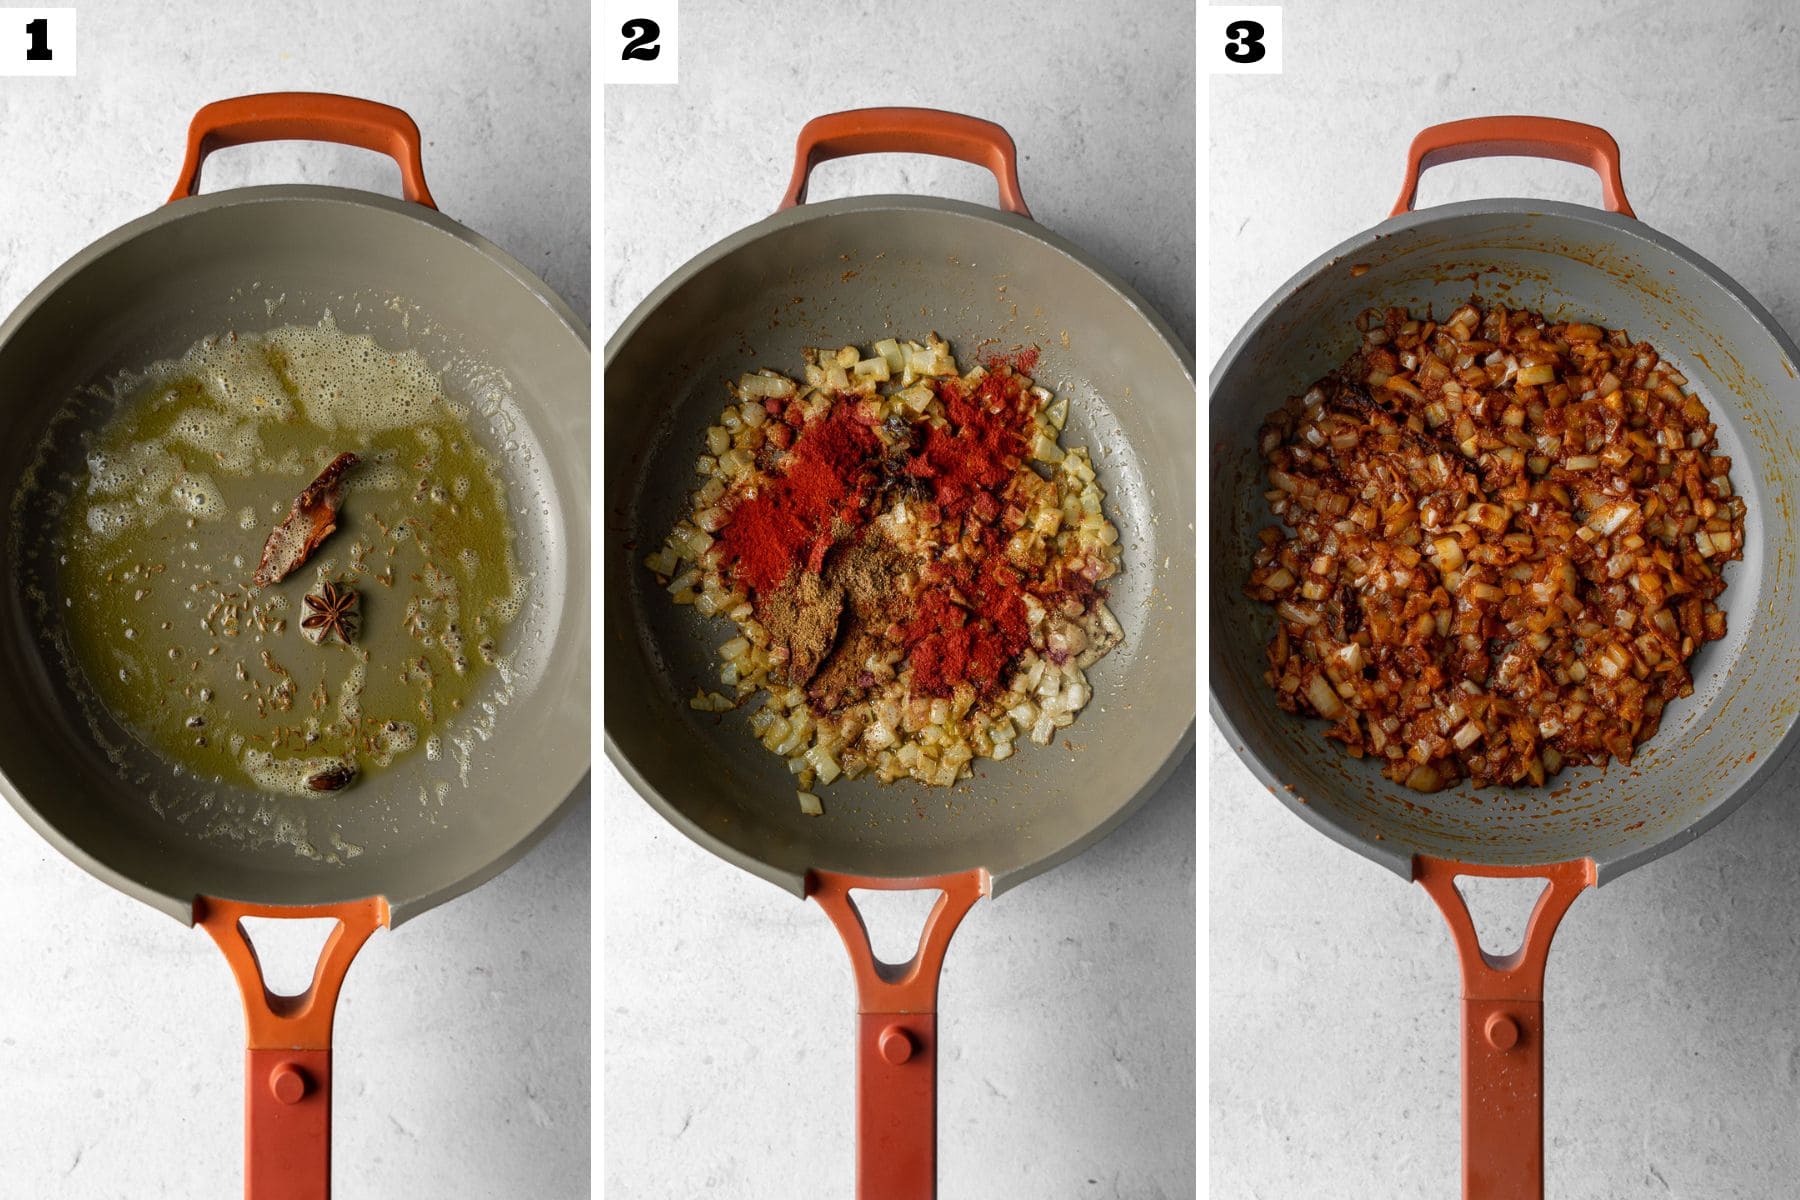 3 photos labeled with steps demonstrate the stages of frying onions and roasting spices.